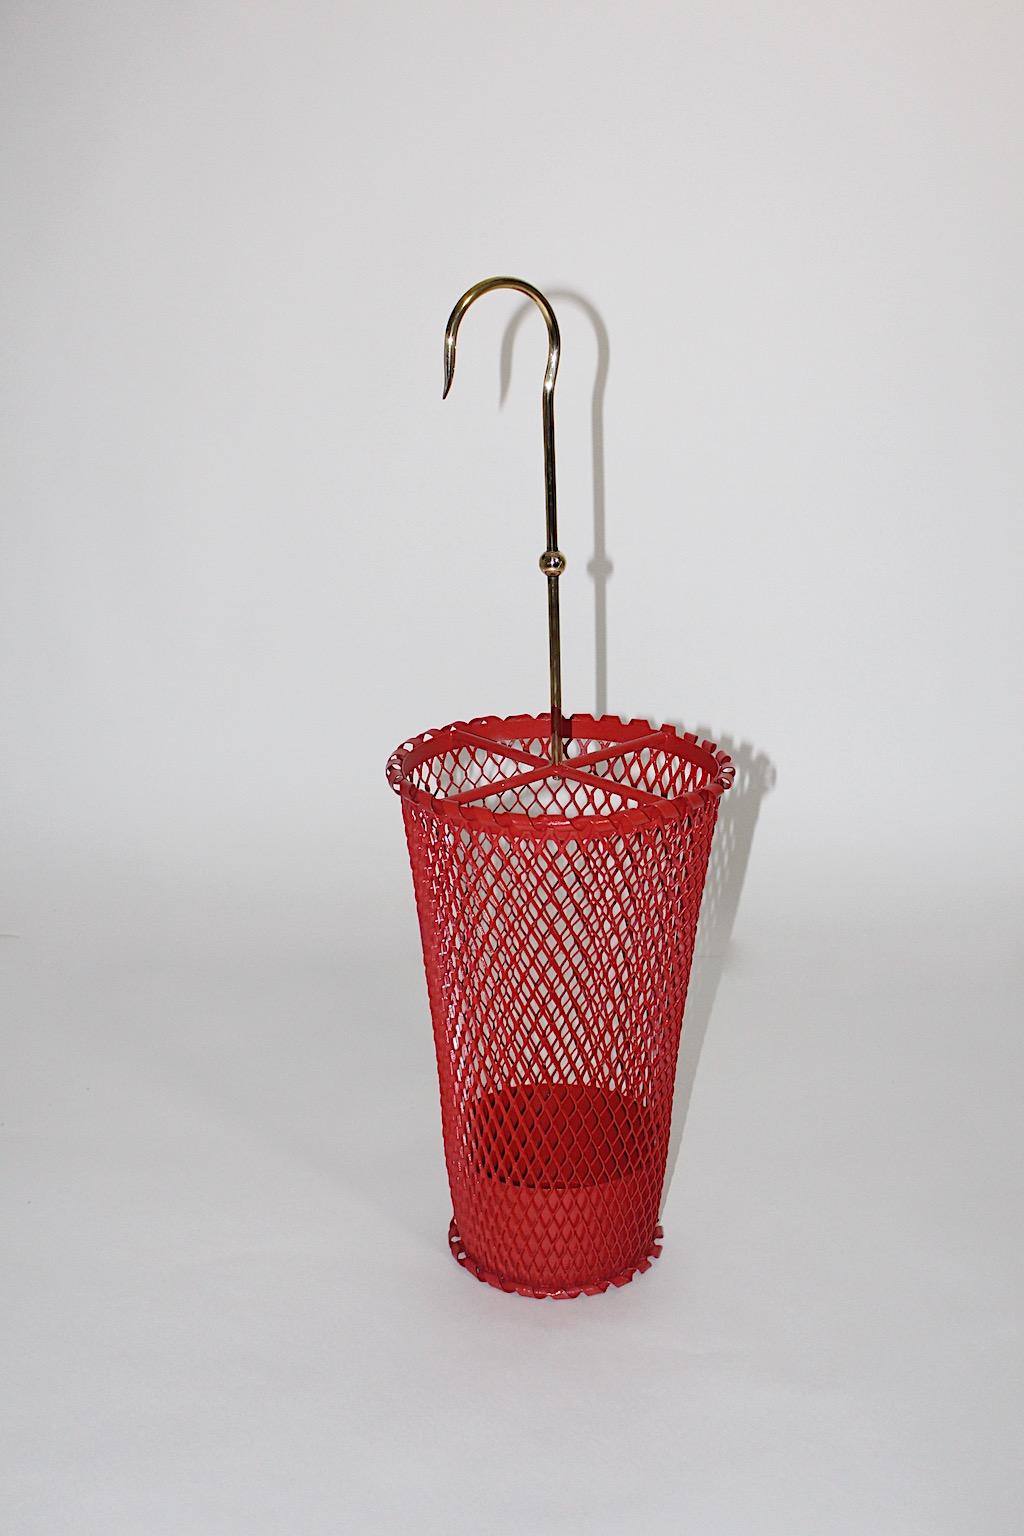 Mid-Century Modern vintage red brass umbrella stand by Mathieu Matégot for Ateliers Matégot, France, 1950s.
An amazing umbrella stand from red lacquered metal and brass.
This vintage umbrella stand features a newly red lacquered iron mesh body,